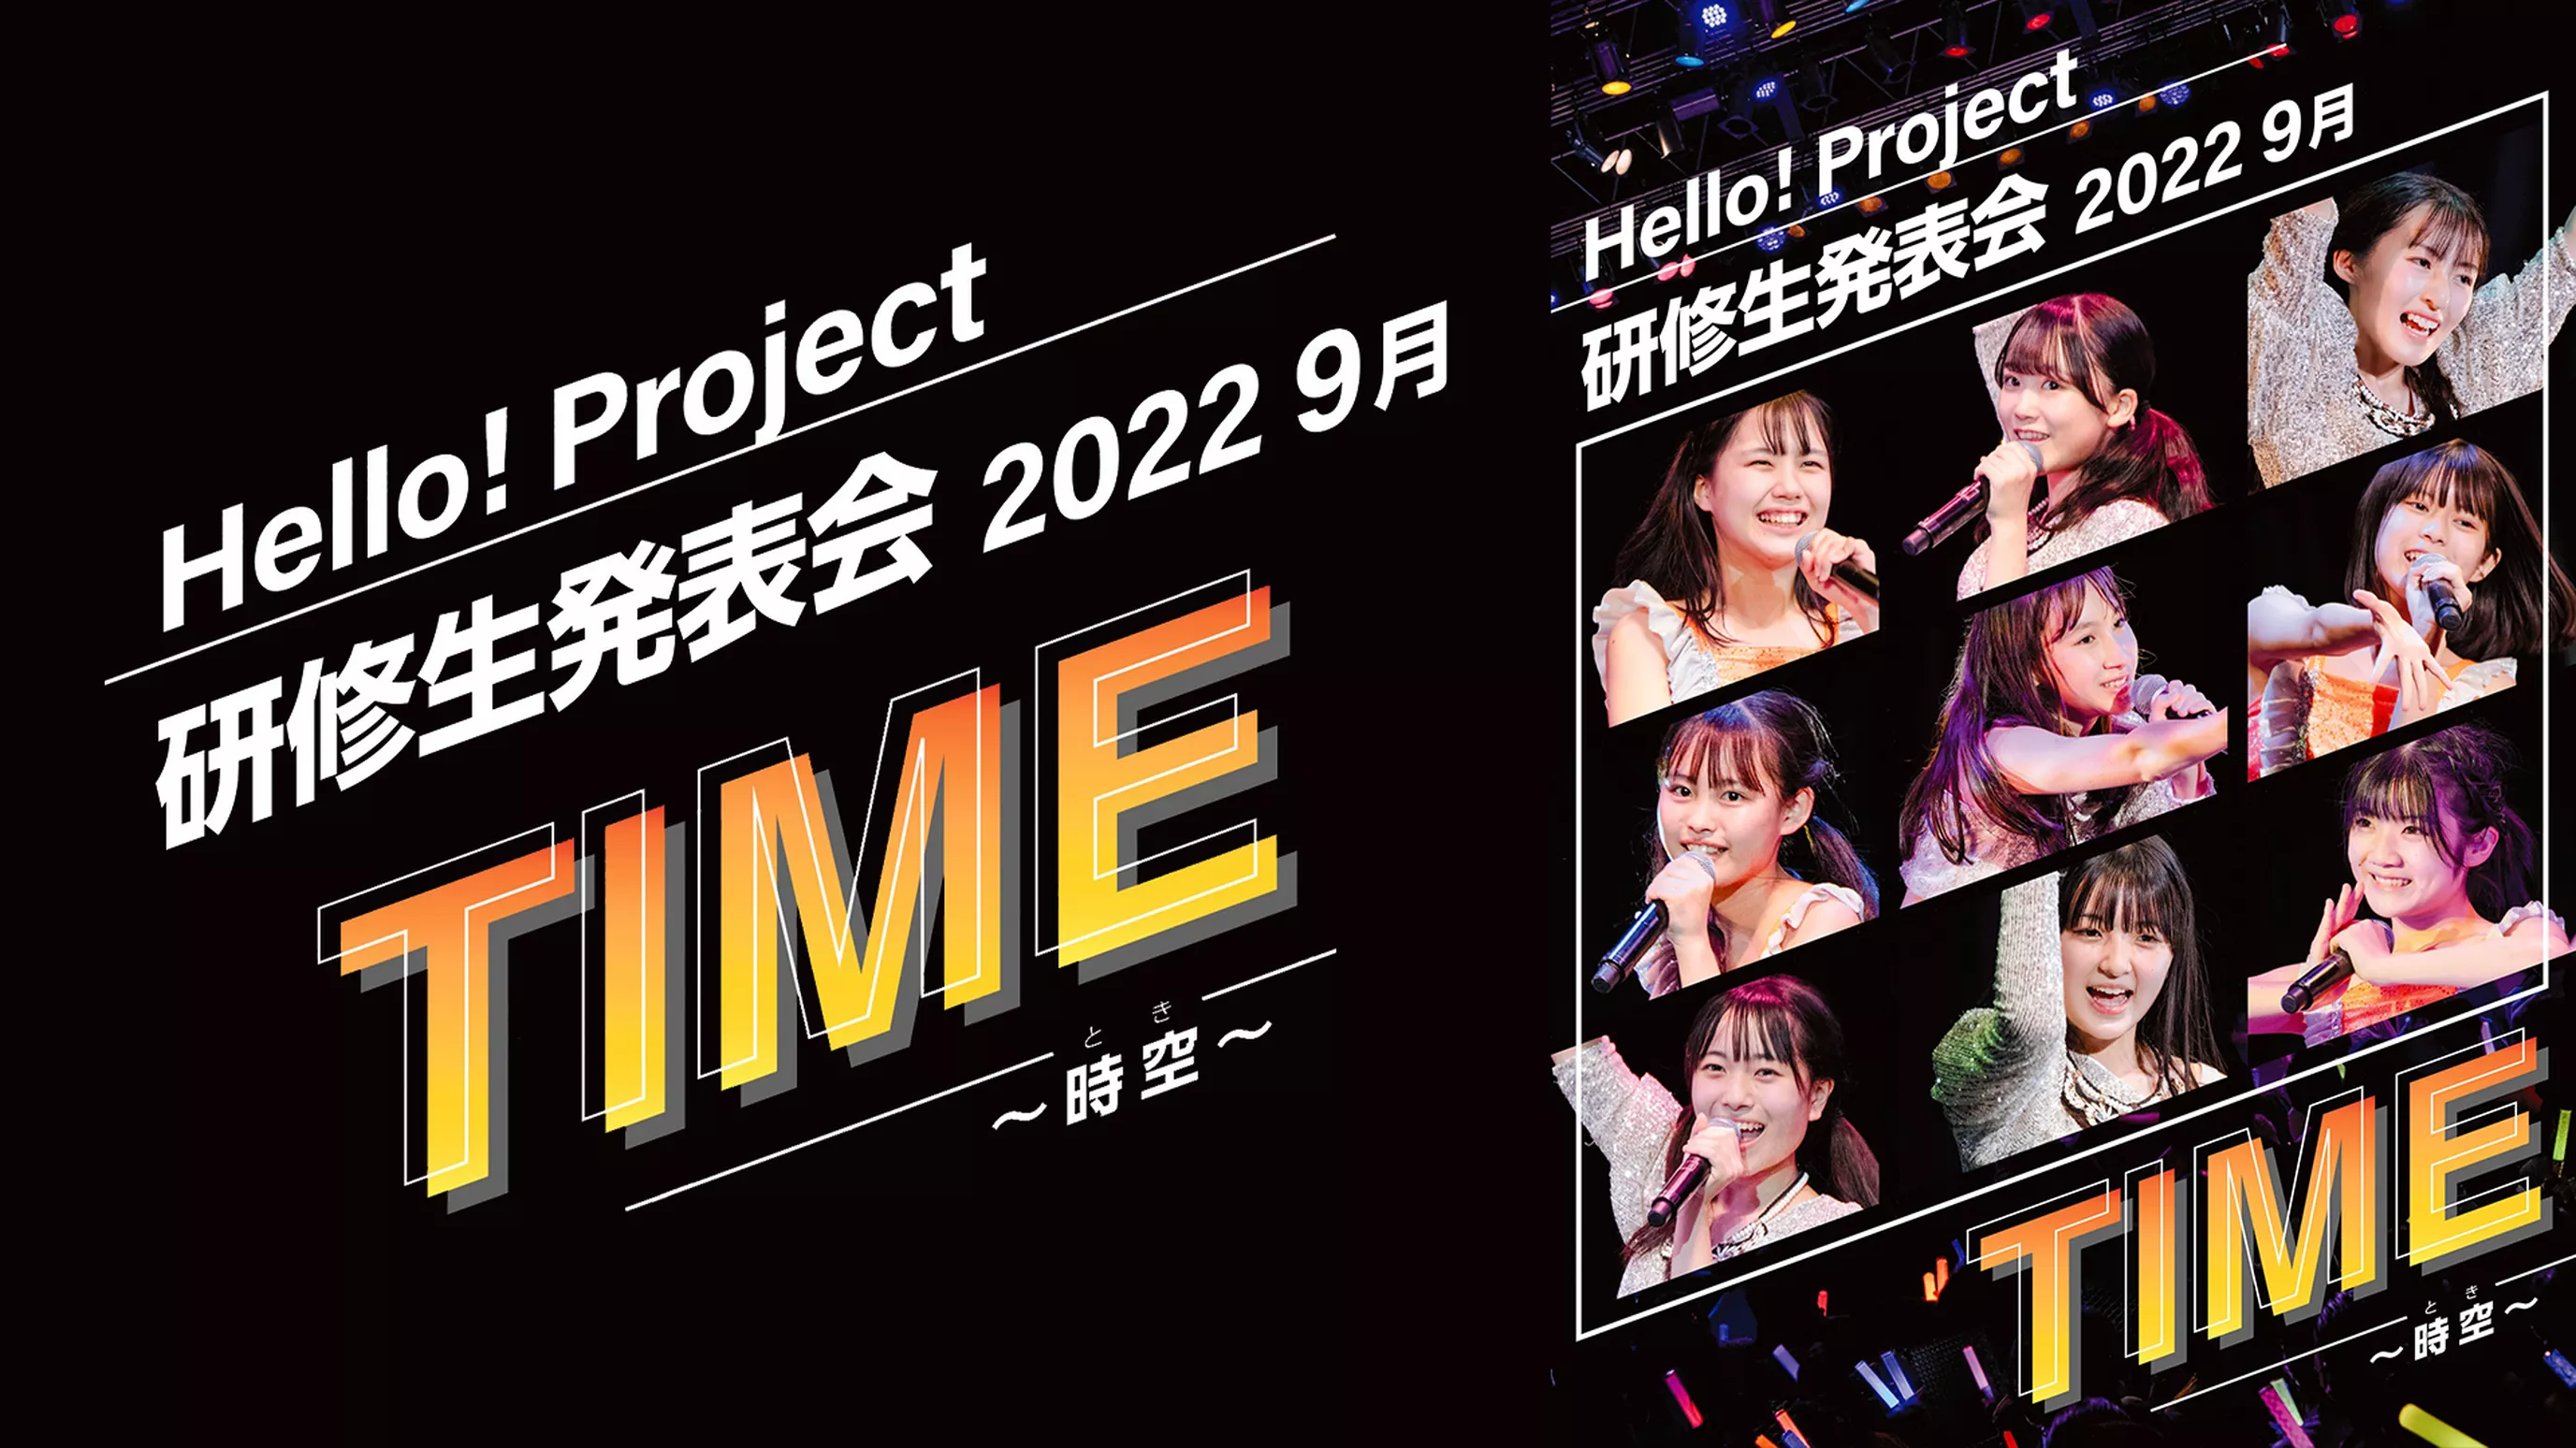 Hello! Project 研修生発表会 2022 9月 TIME～時空～